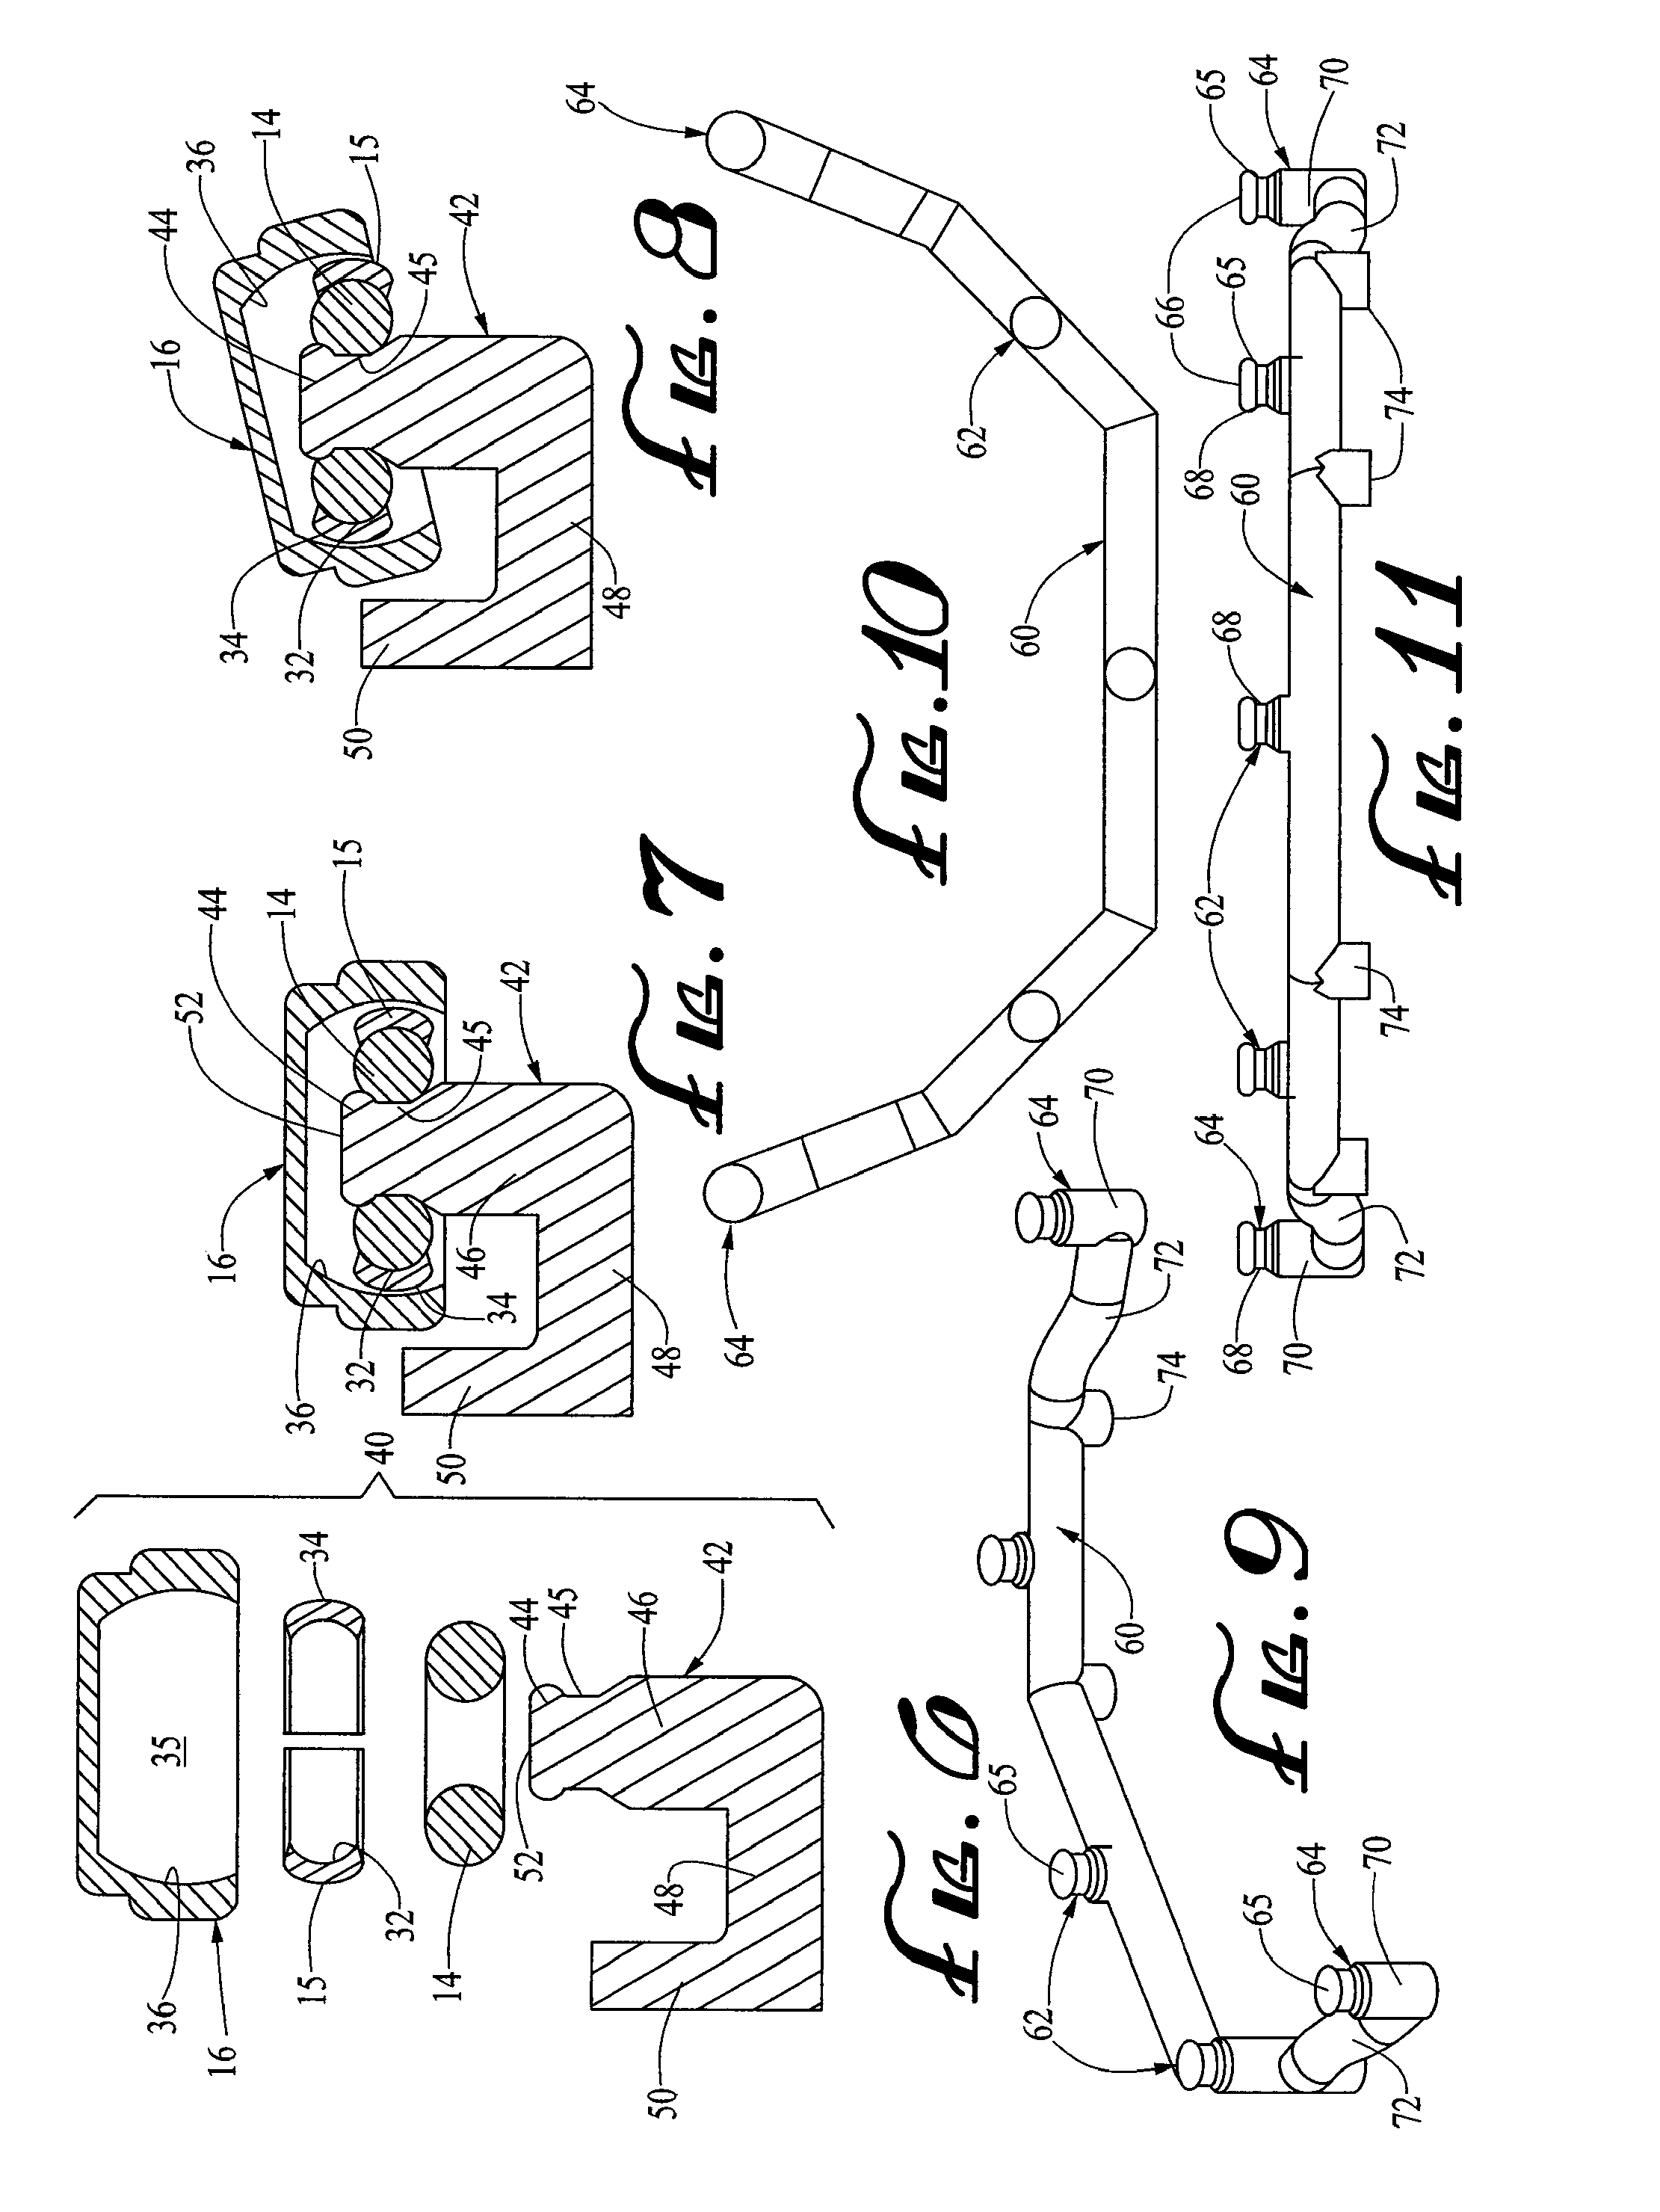 Dental attachment assembly and method